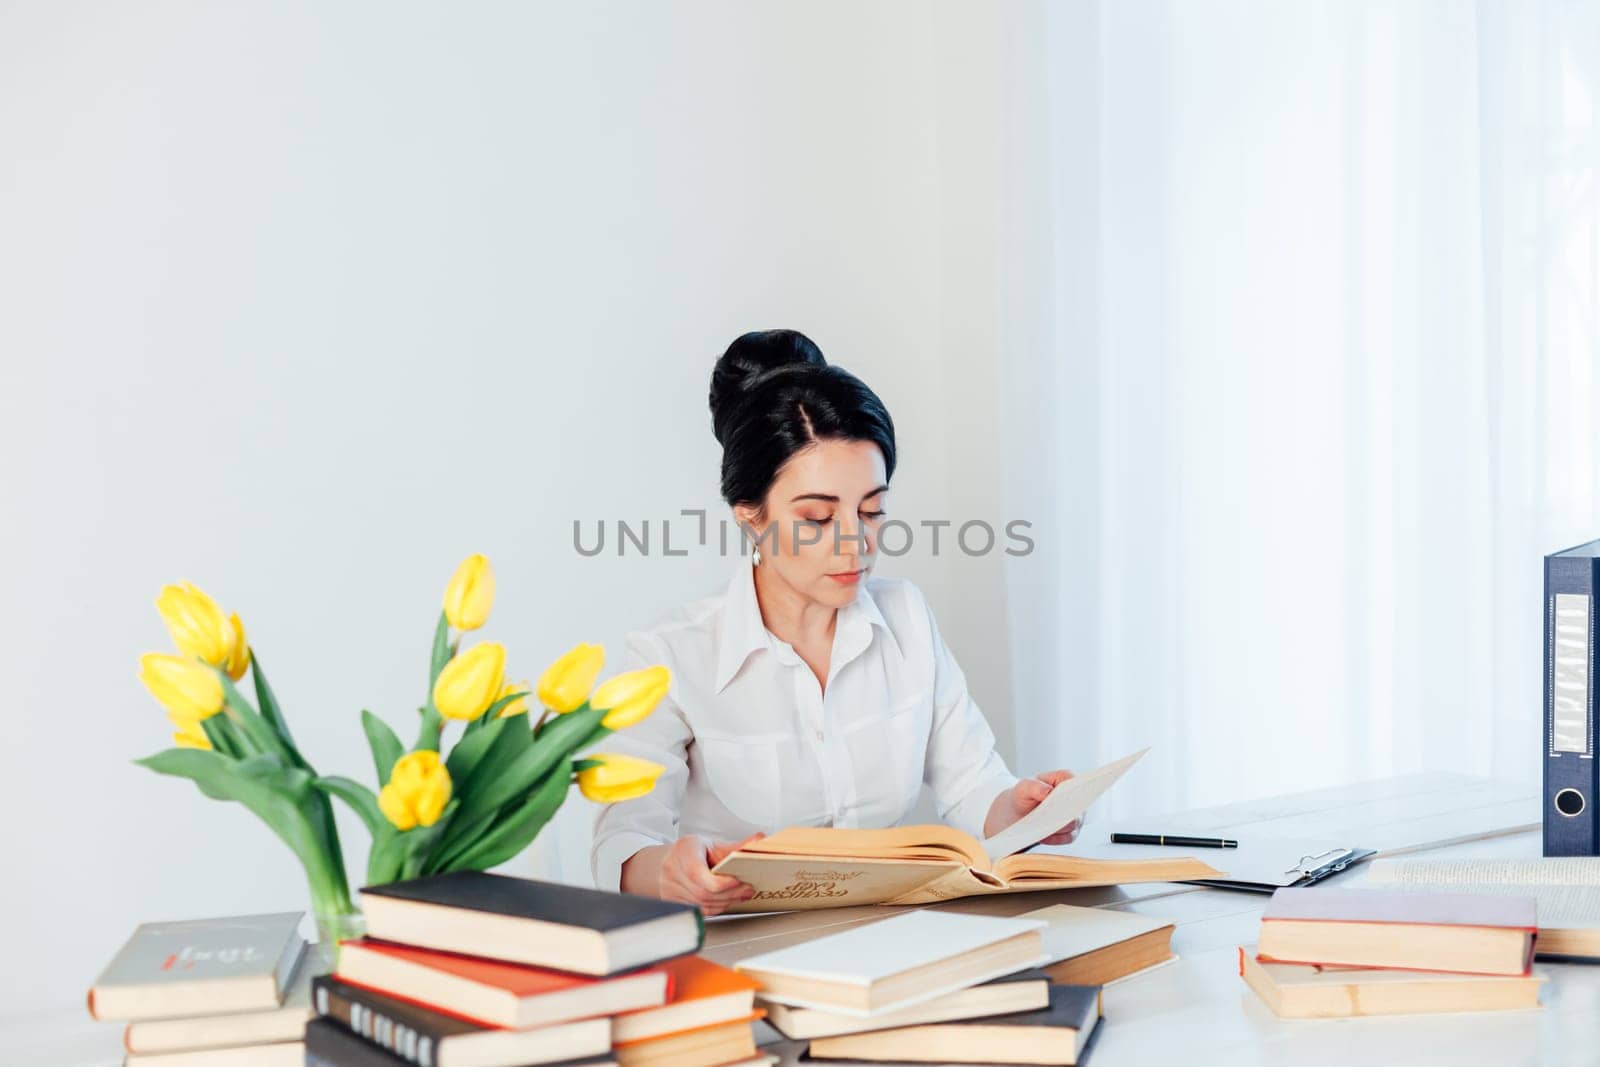 women in a business suit behind a table with books by Simakov